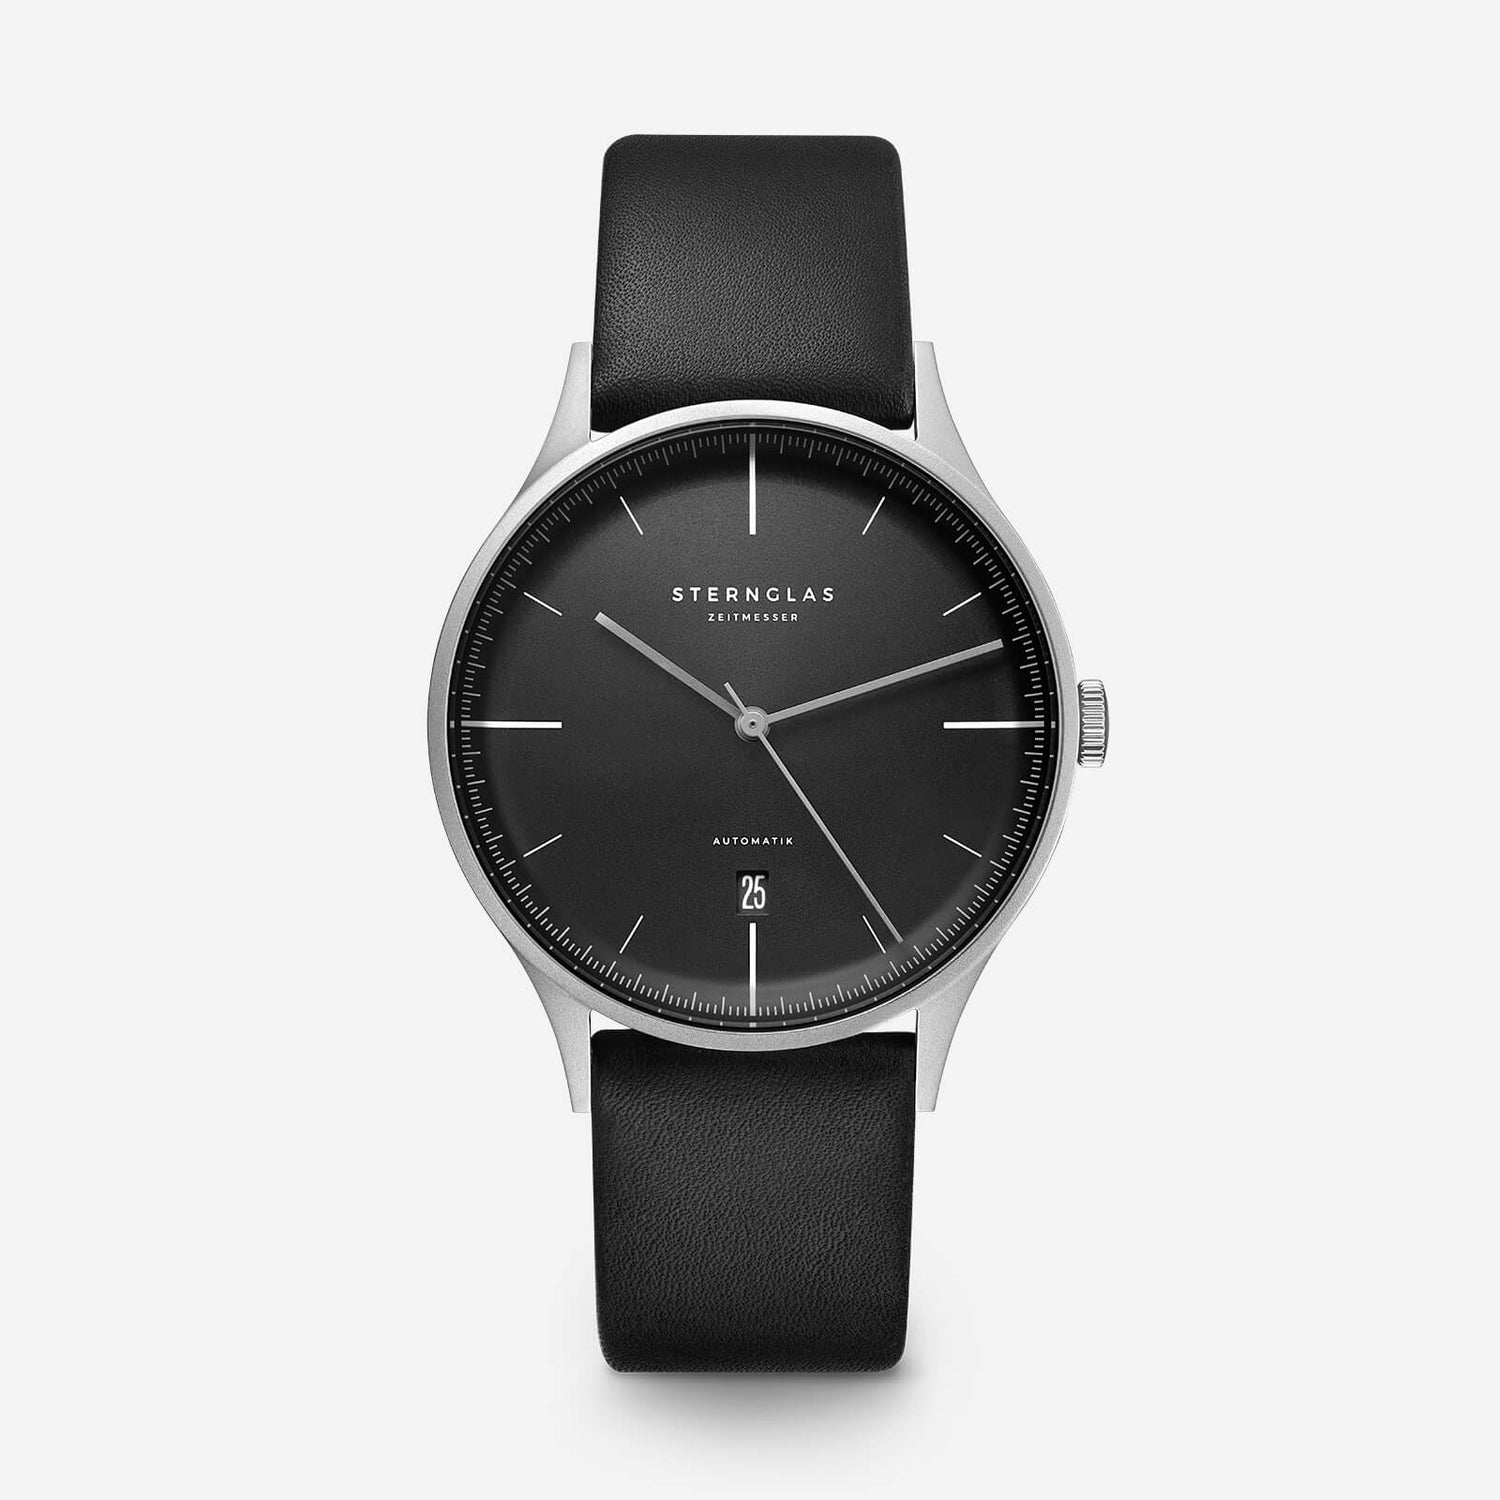 popup|Ultra-flat and understated|Inspired by the Bauhaus movement, the dial is reduced and kept clear. Fine details, such as the concave curvature, nevertheless give the model an independent character.